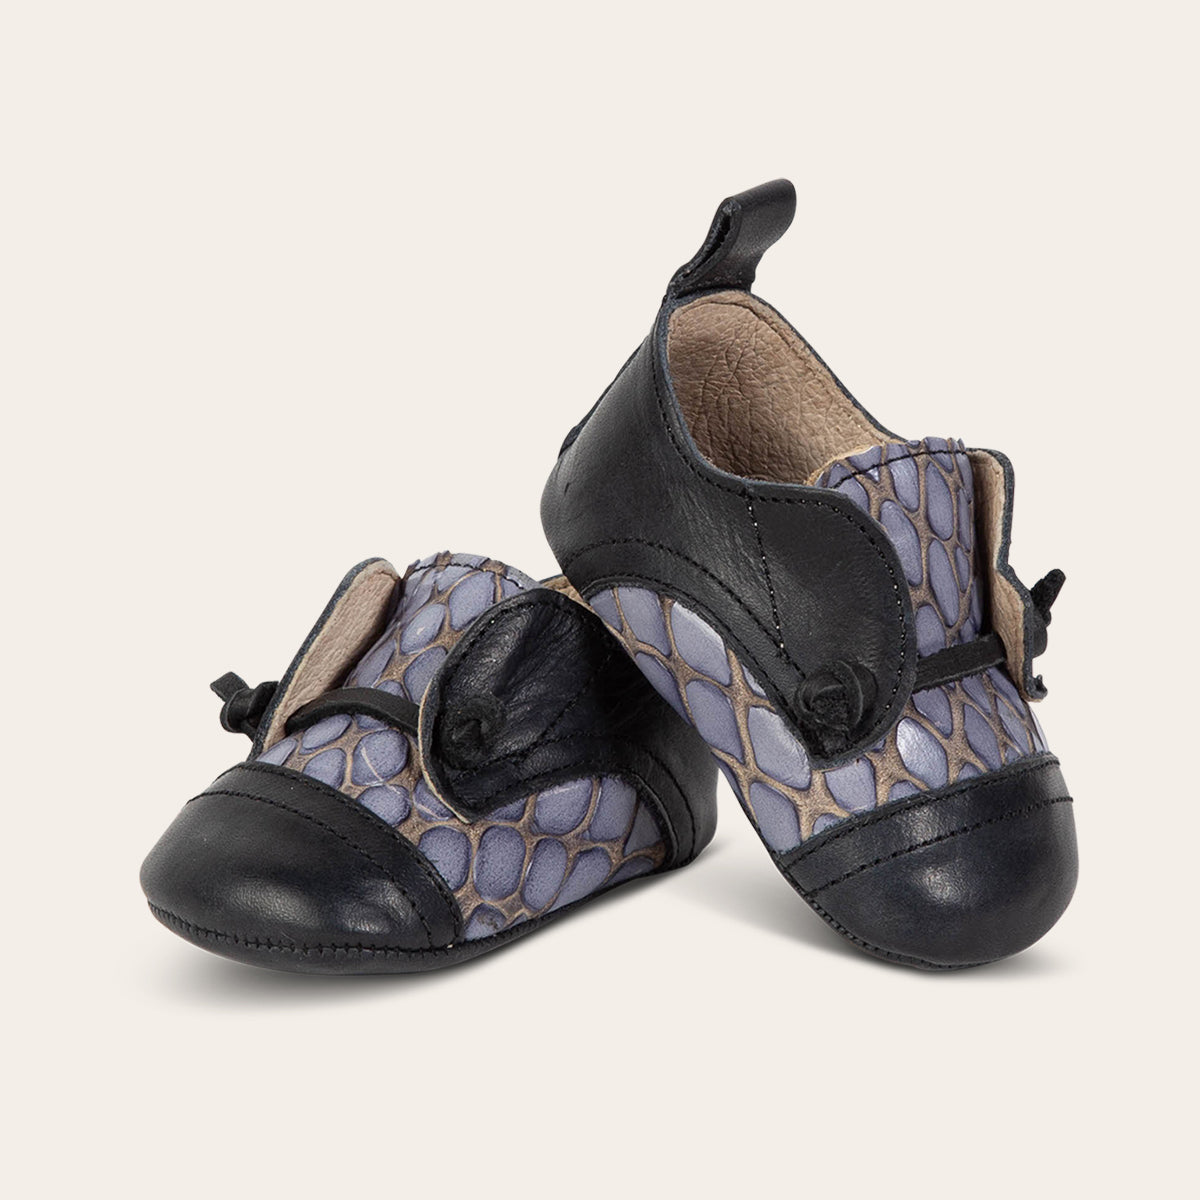 front view showing contrasting decorative knotted leather lace on FREEBIRD infant baby Mabel navy multi leather shoe  